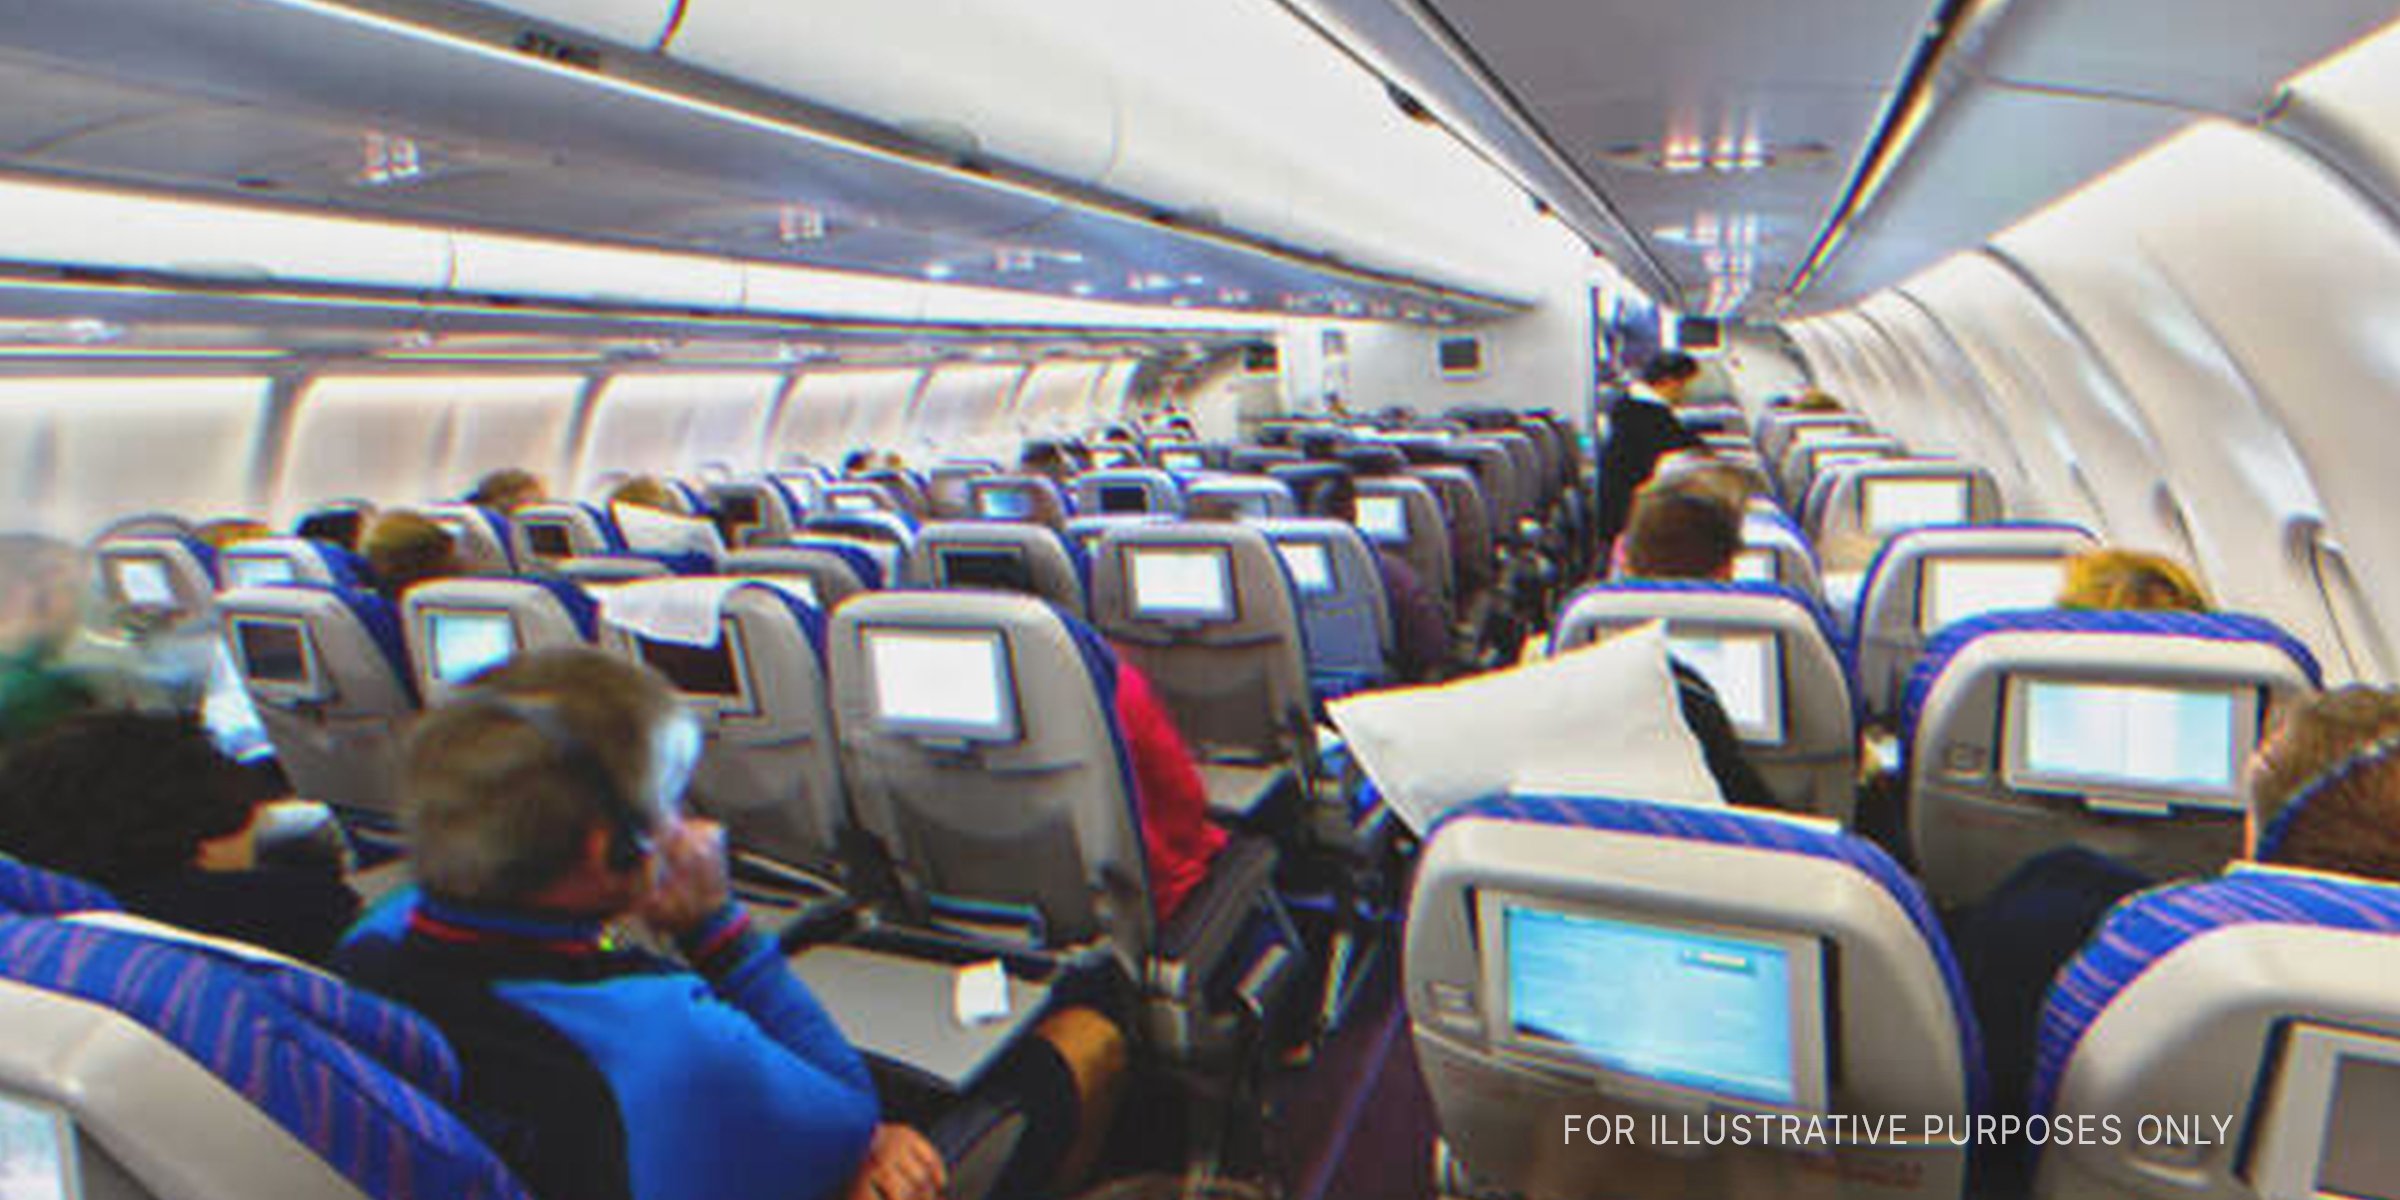 Passengers seated in an airplane | Source: Shutterstock